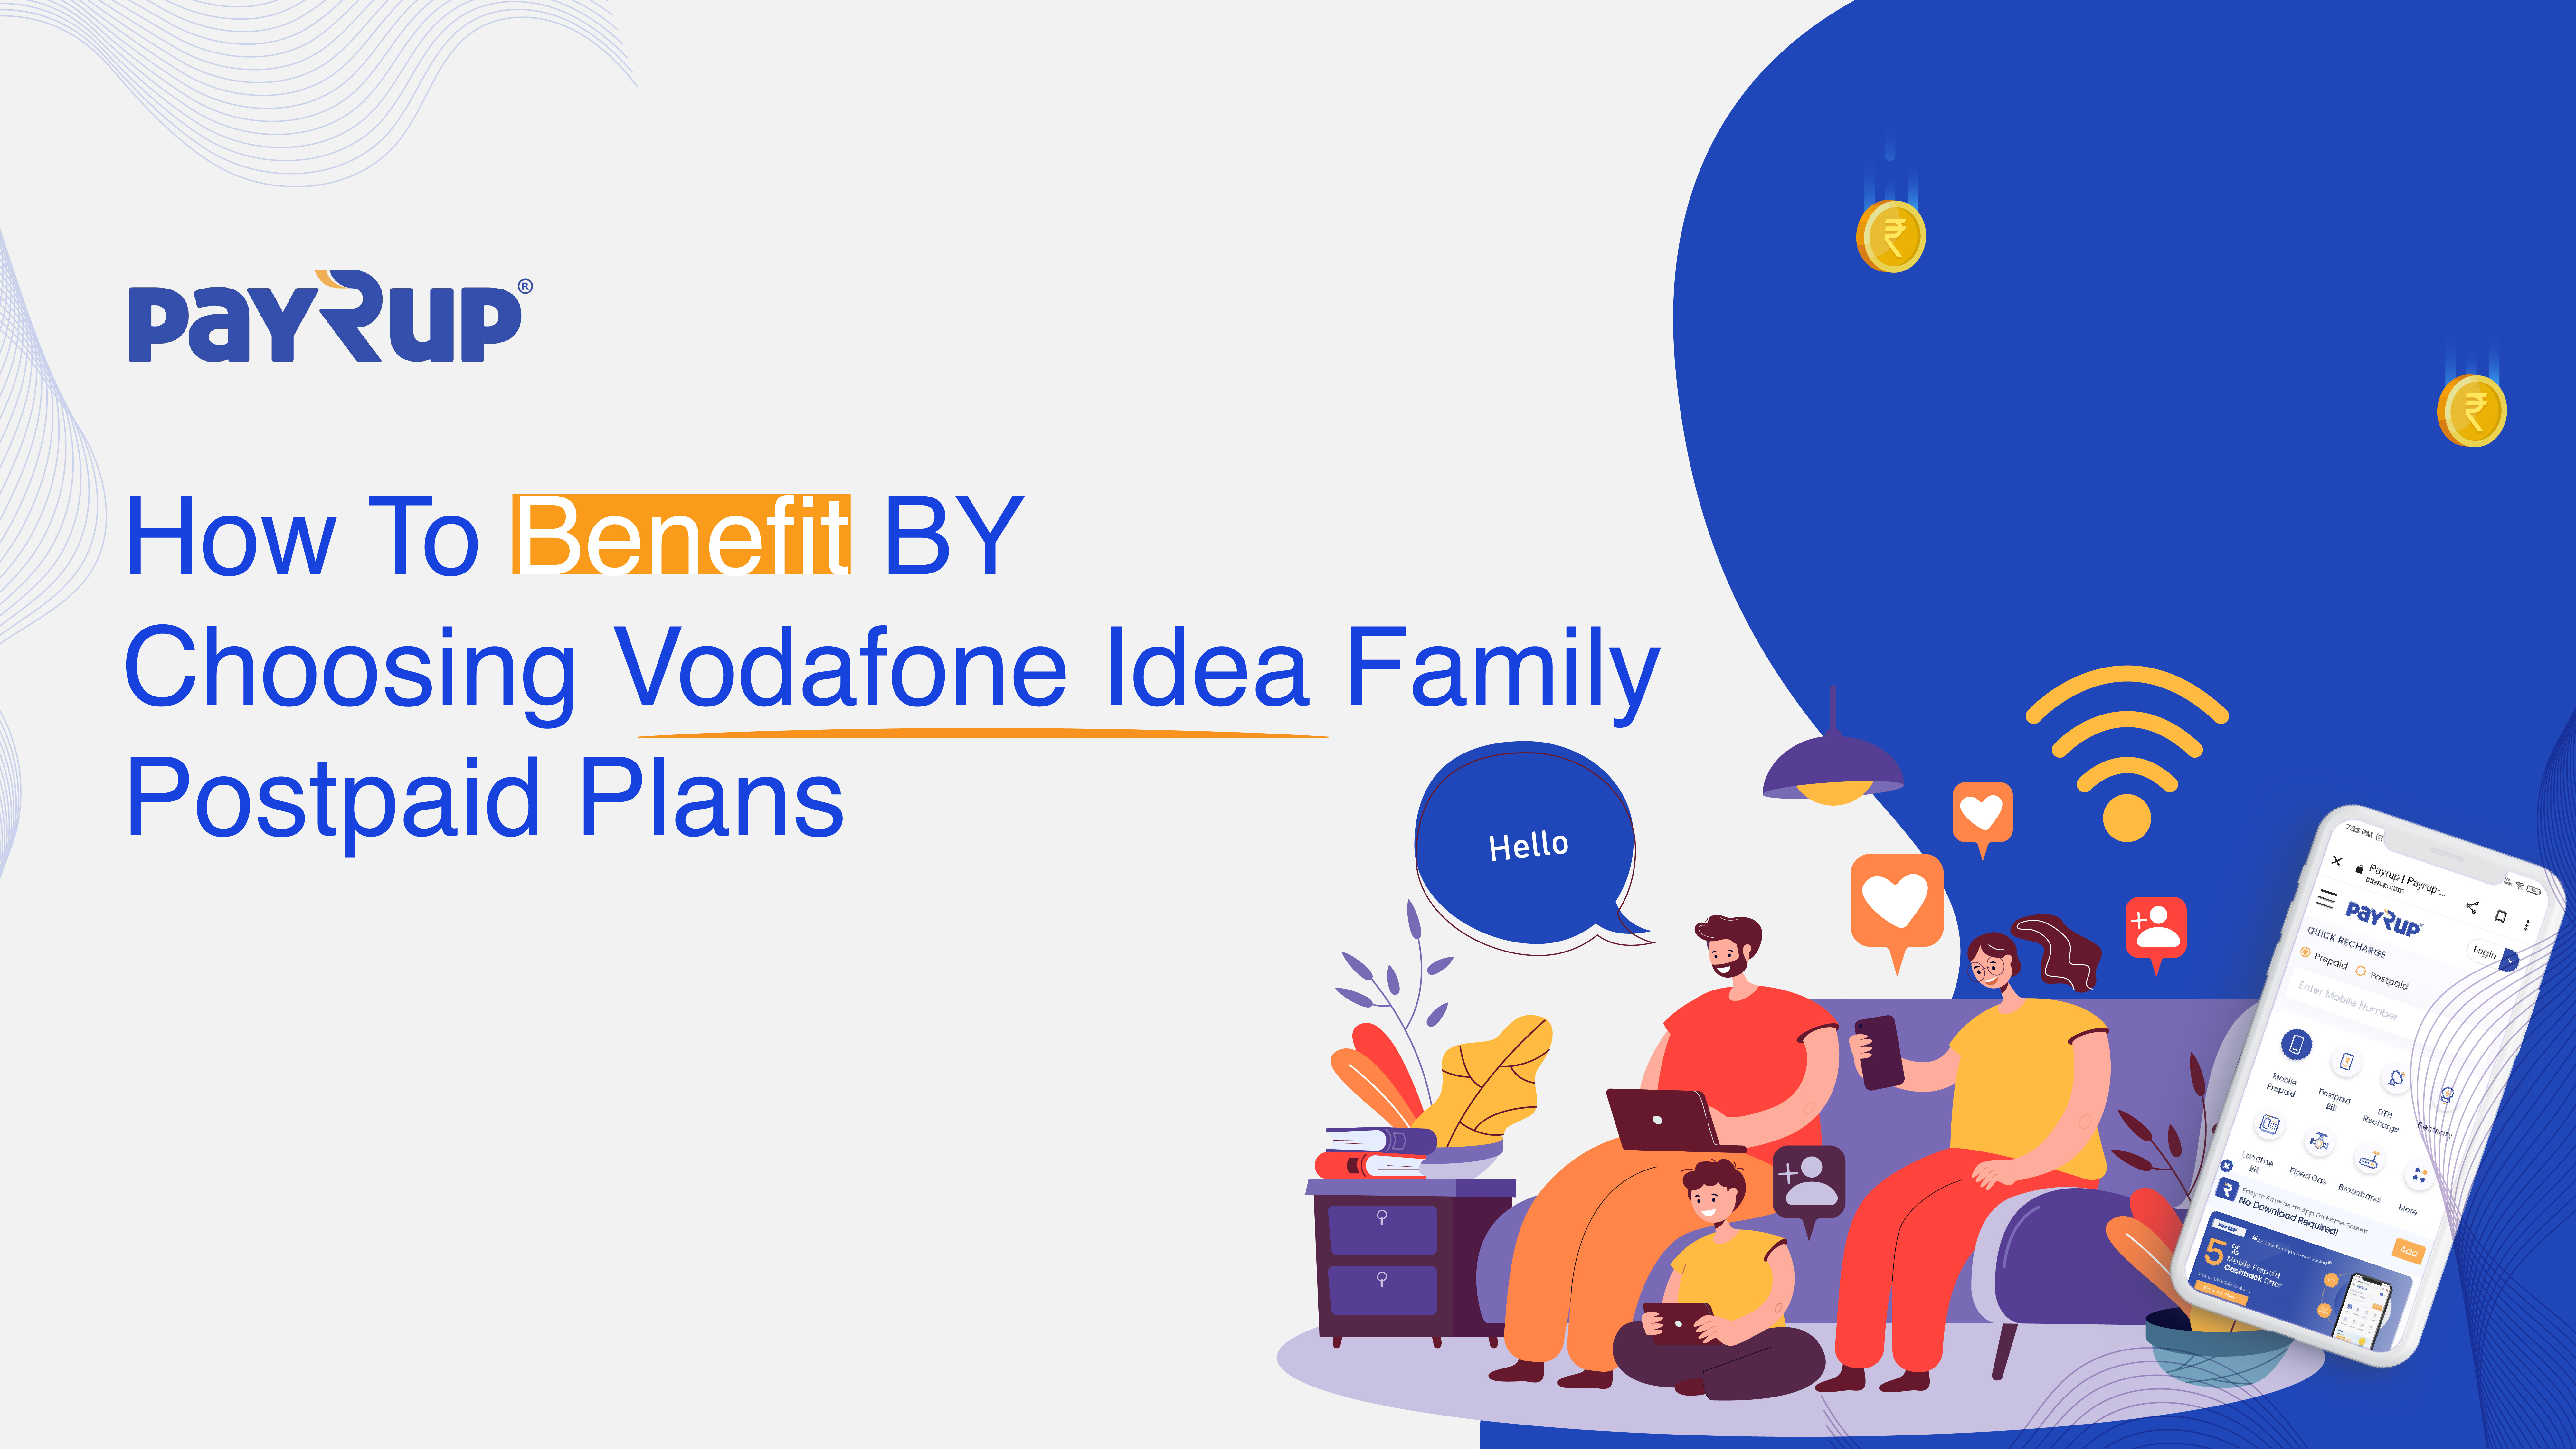 How to benefit by choosing Vodafone Idea family postpaid plans